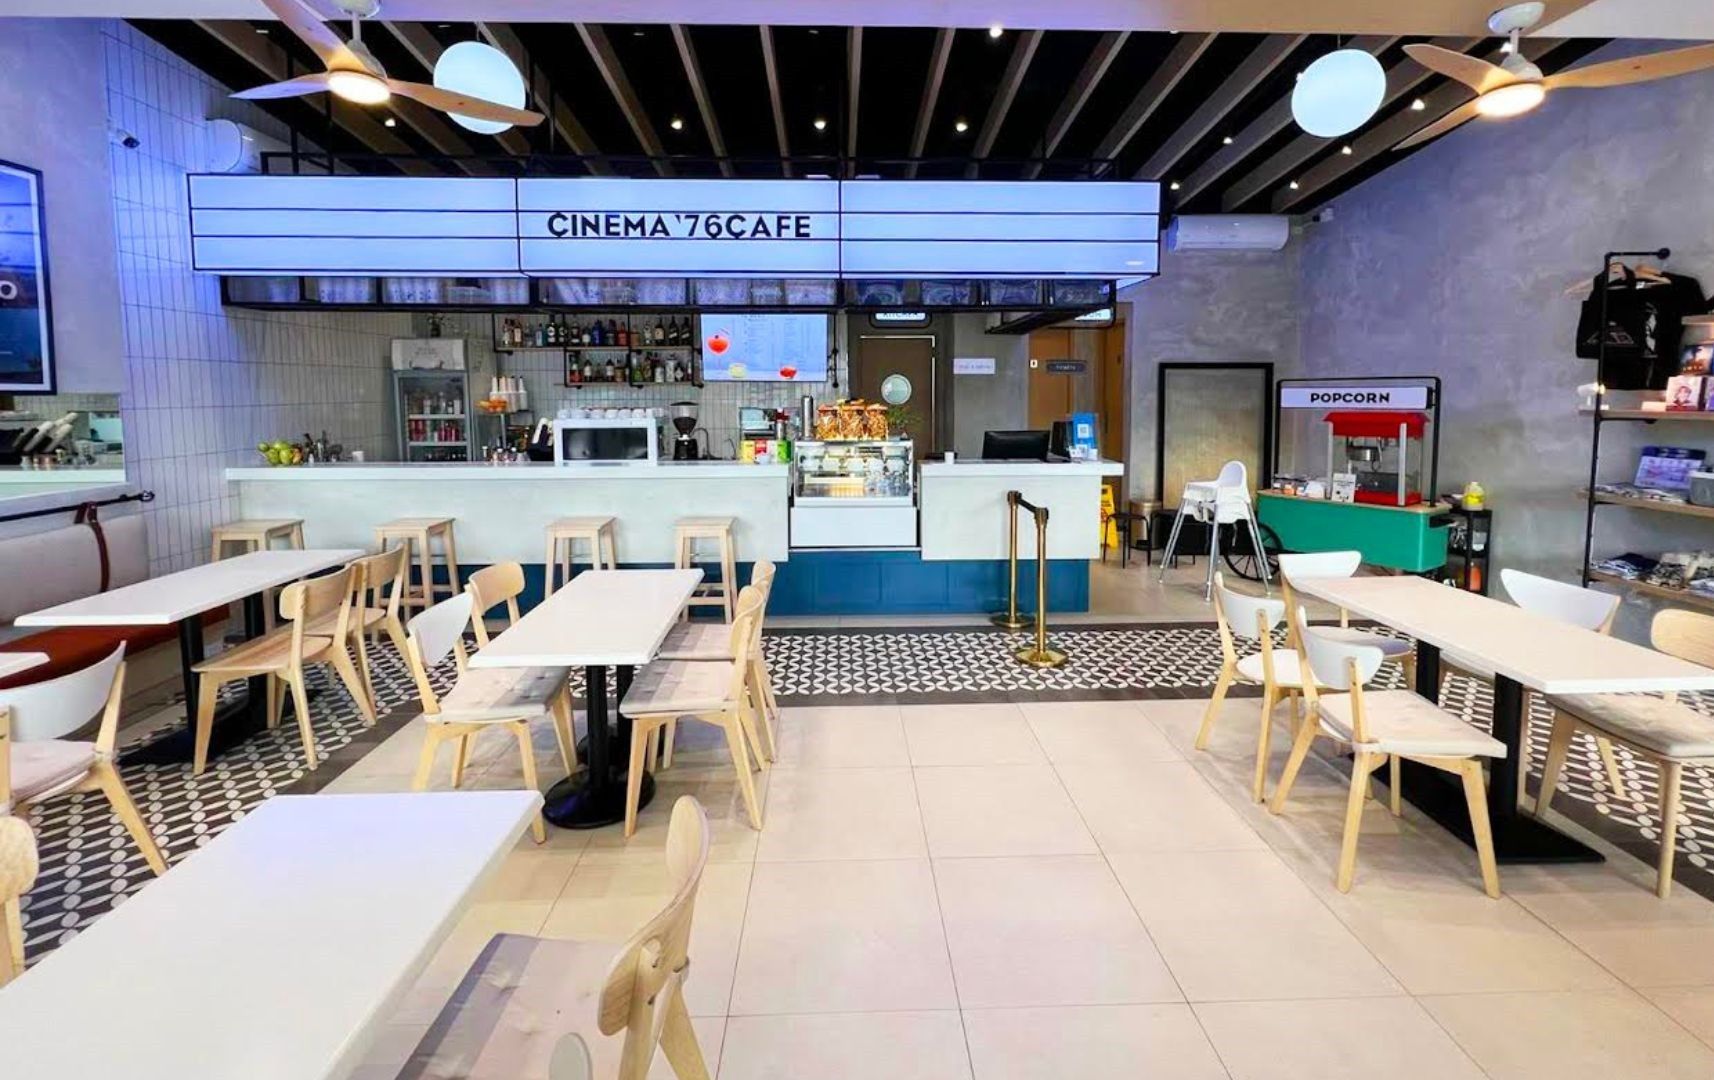 Cinema '76 Cafe launching with new menu, interiors in Tomas Morato